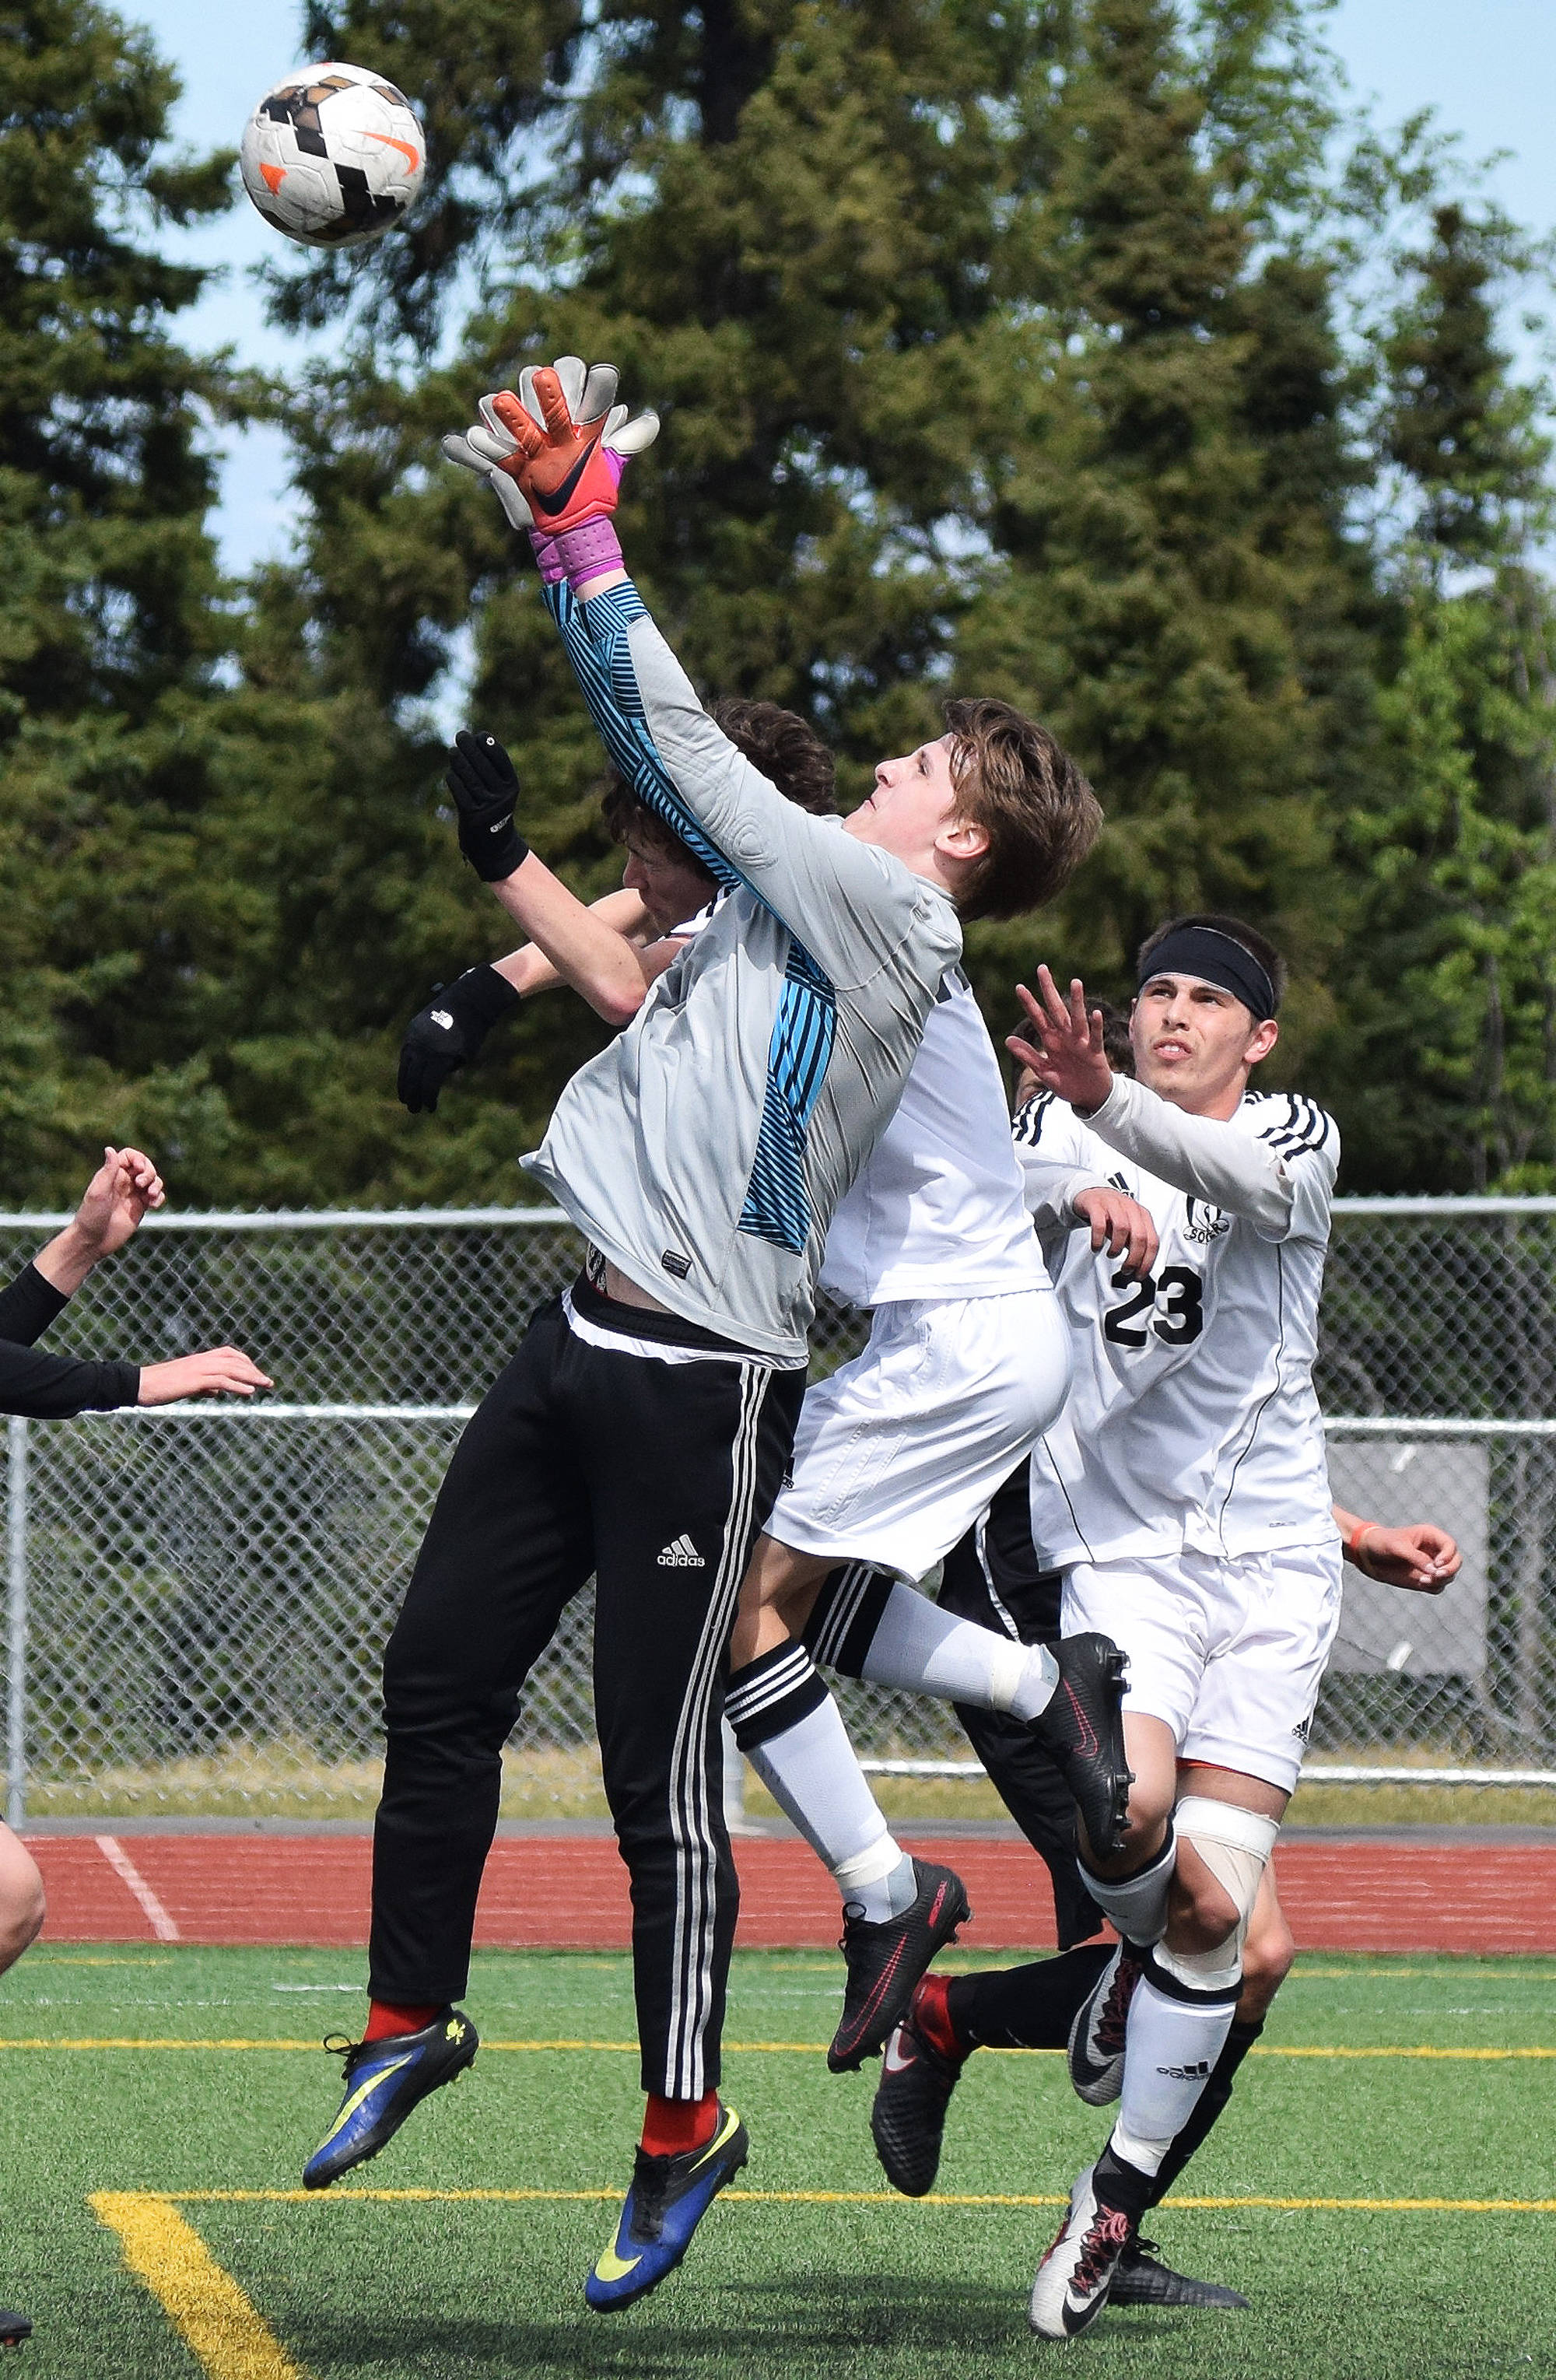 Juneau goalkeeper Mitchell McDonald grabs a shot on goal from Kenai Central with Zack Tuttle (23) looking on, in the Division II state soccer championship final Saturday afternoon at Service High School. (Photo by Joey Klecka/Peninsula Clarion)